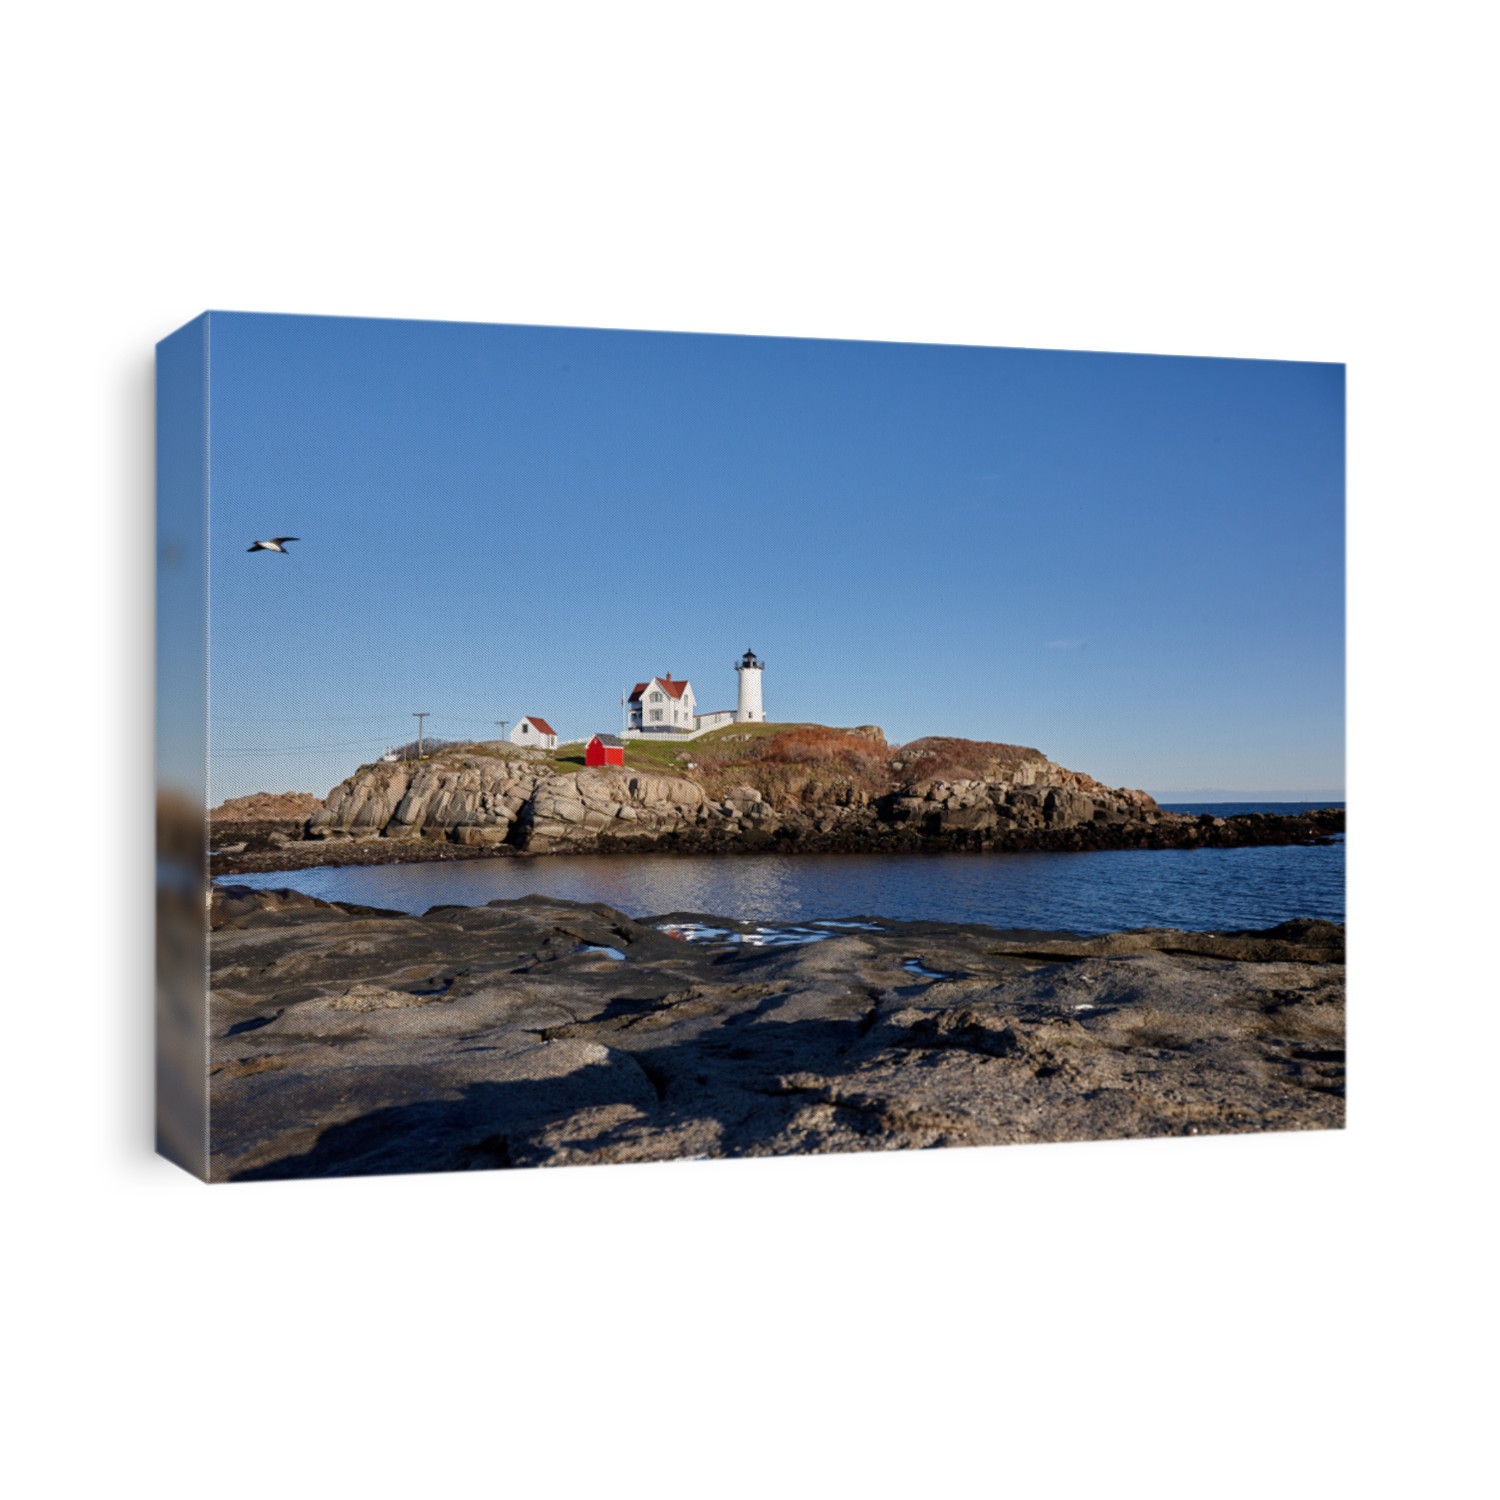 Cape Neddick Light Nubble lighthouse York Maine Blue skies rocks and ocean in the foreground